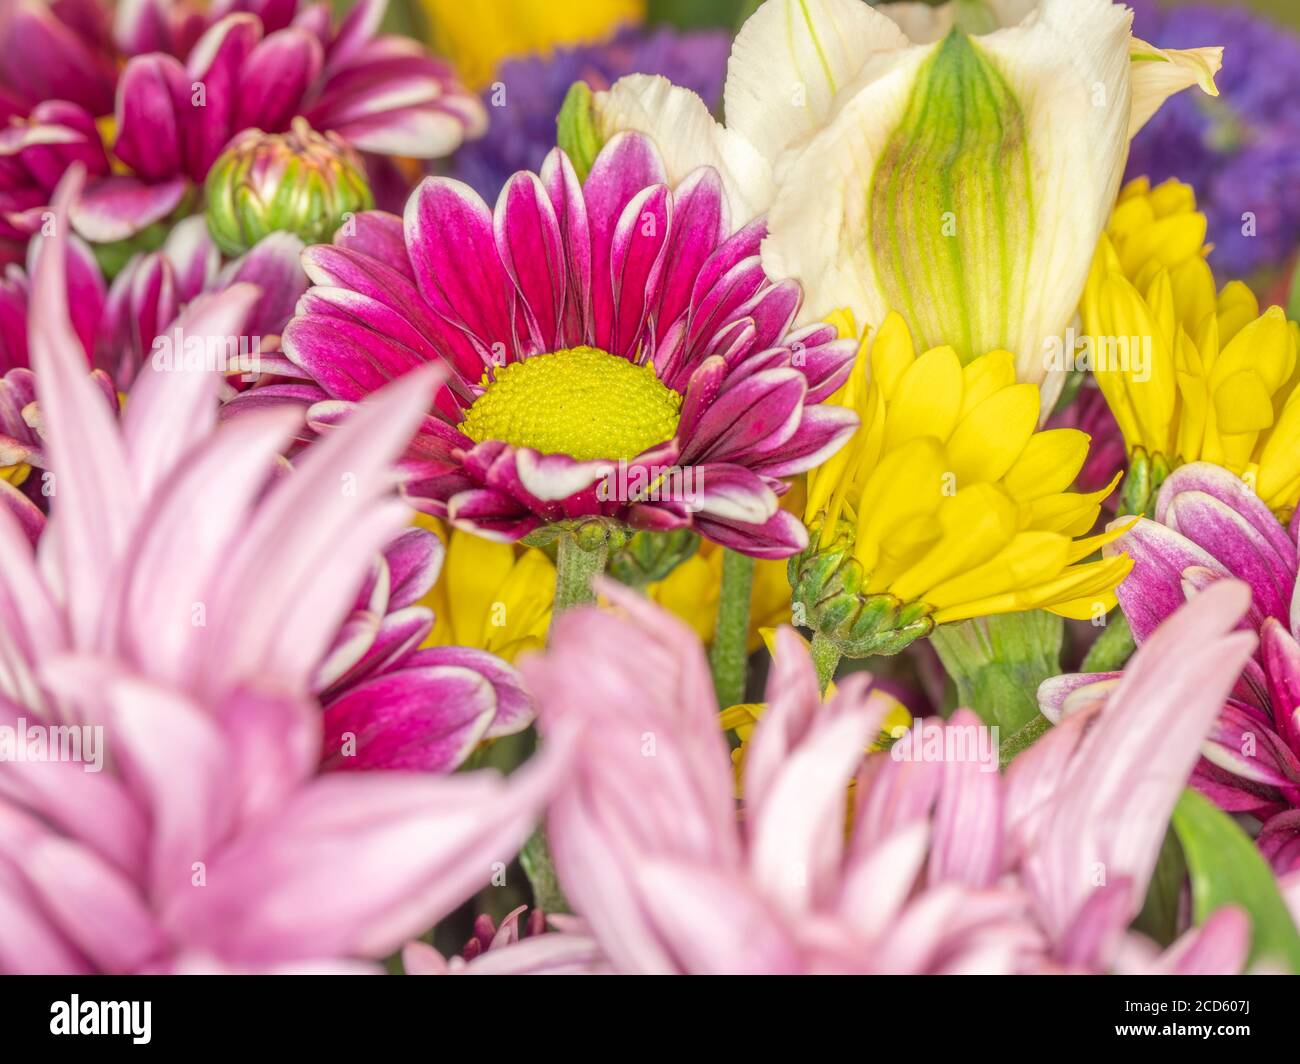 Group of multi colored flowers Stock Photo